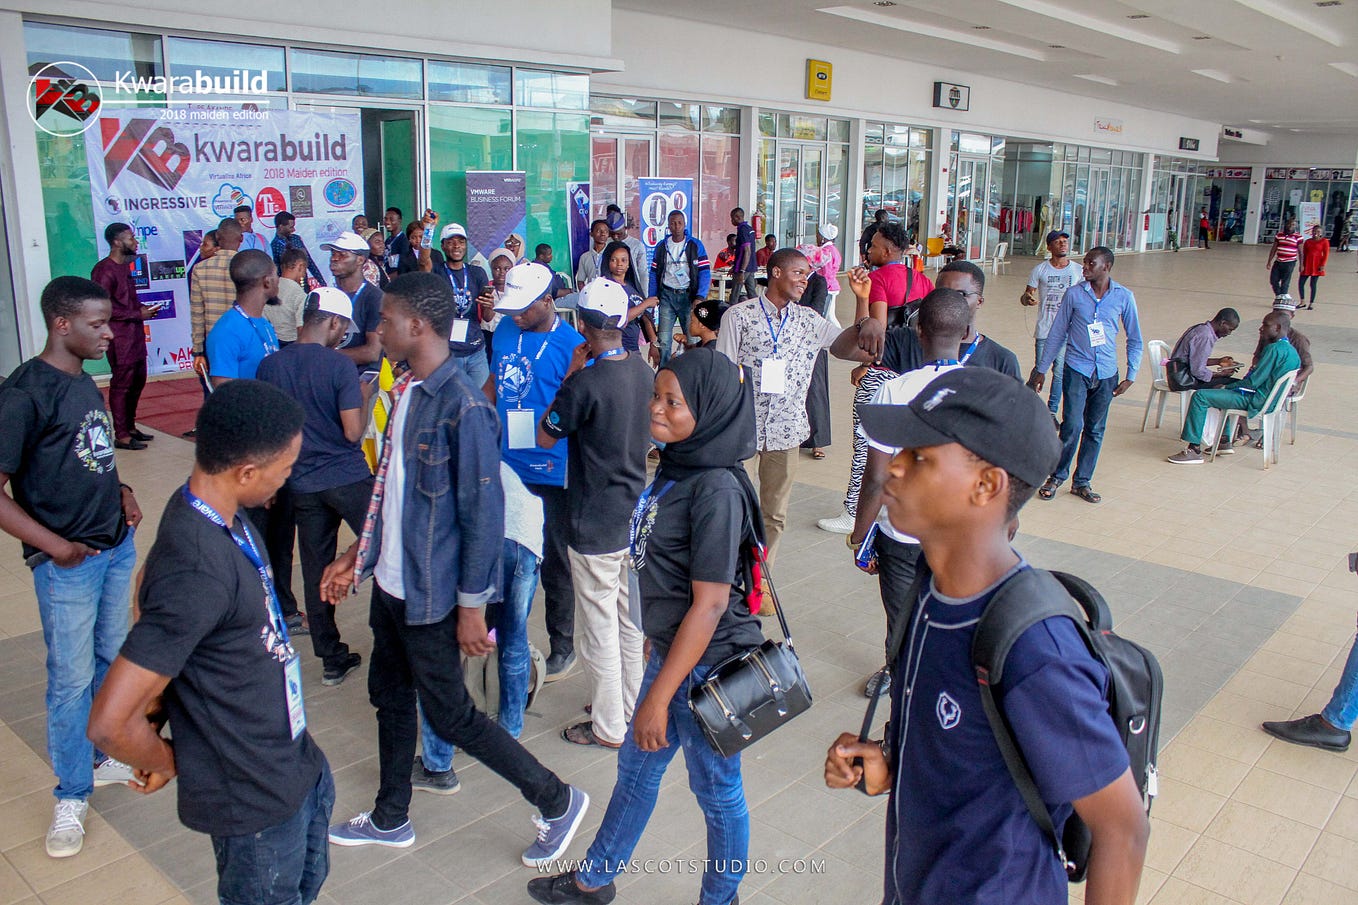 Kwarabuild hosted the biggest Tech Conference in North-Central; with a low budget